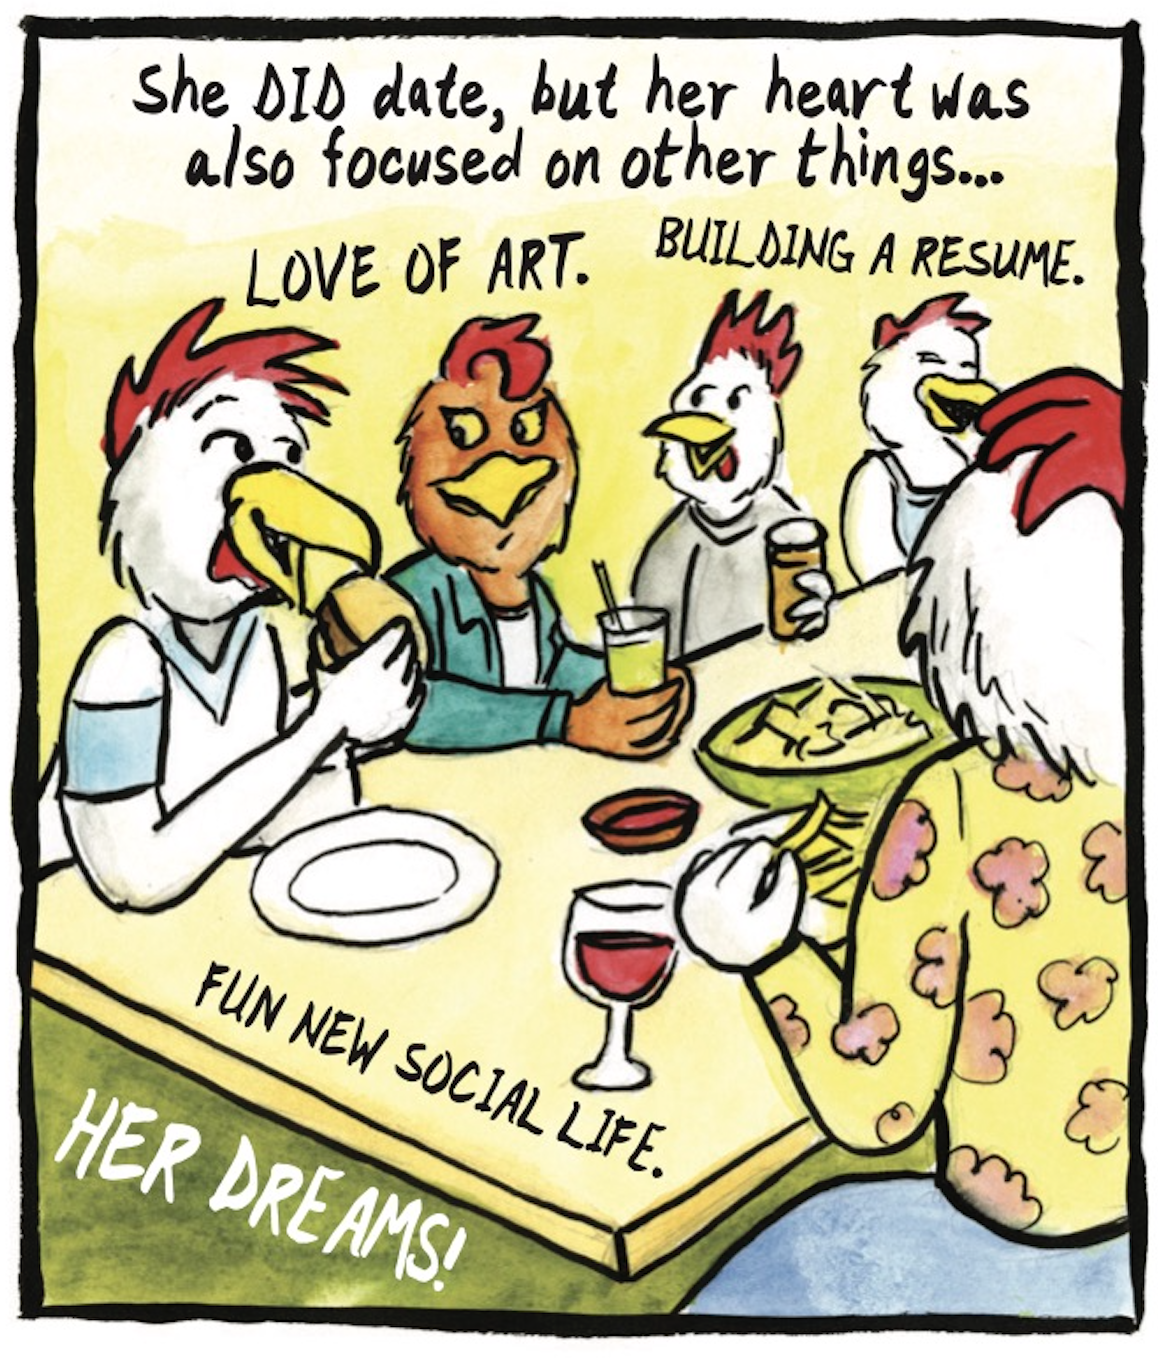 â€œShe DID date, but her heart was also focused on other thingsâ€¦ Love of art. Building a resume. Fun new social life. Her dreams!â€ The red hen is happily surrounded by friends eating and drinking at a dinner table. 